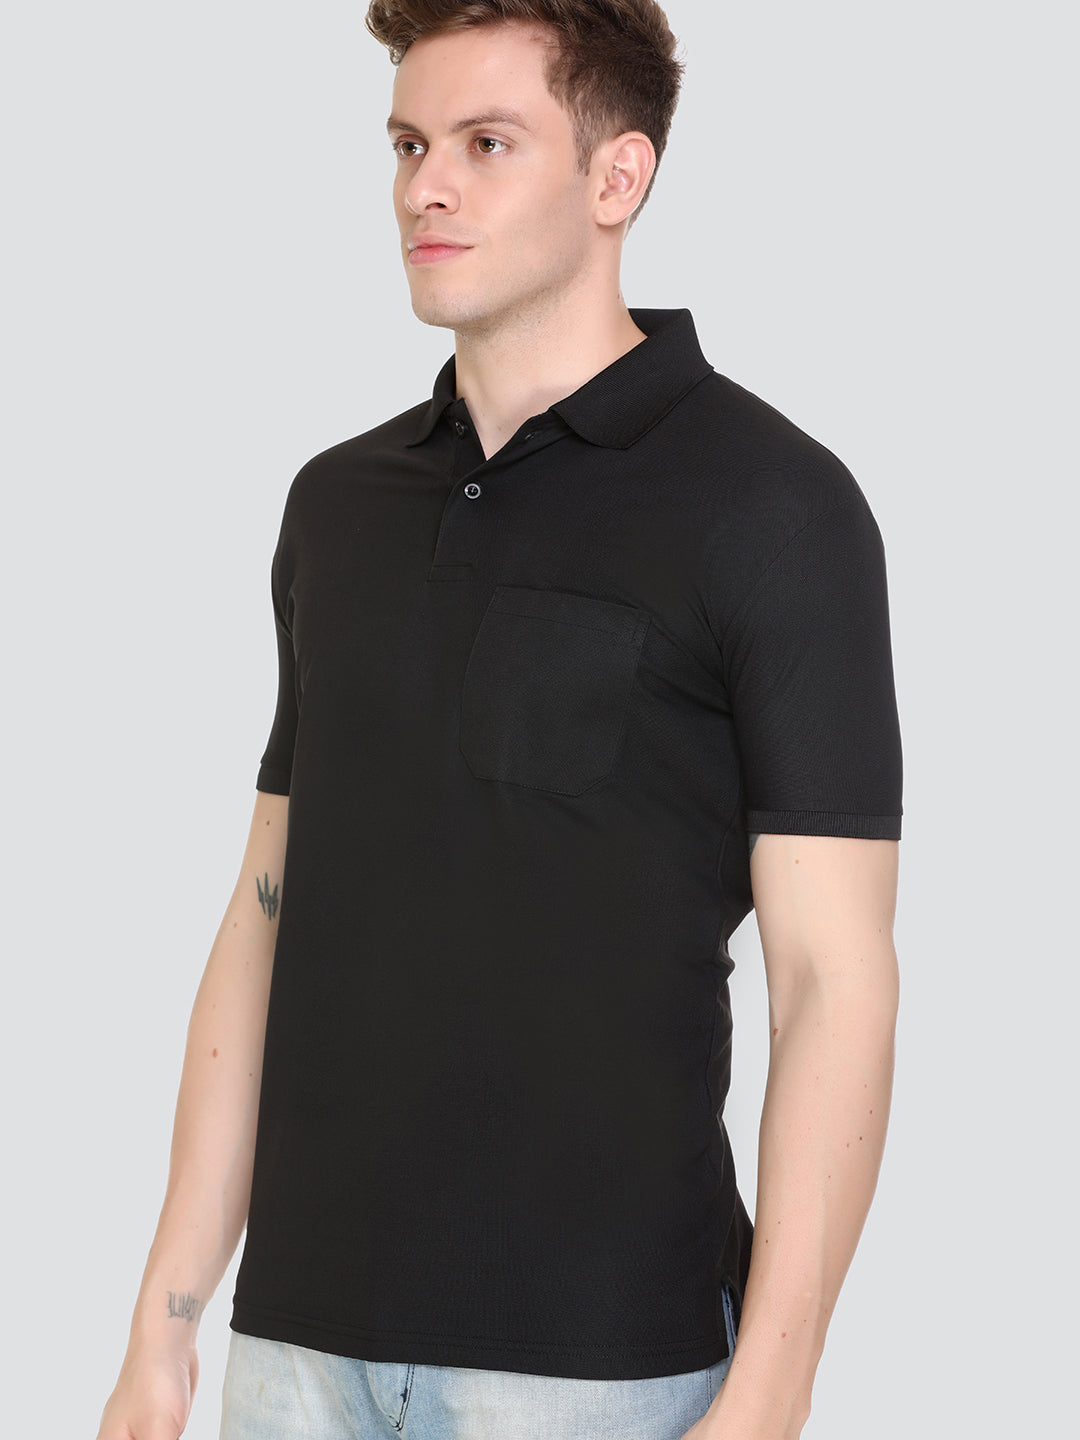 Comfortable Jinxer Black Dry Fit Polo Neck T Shirt for men online in India